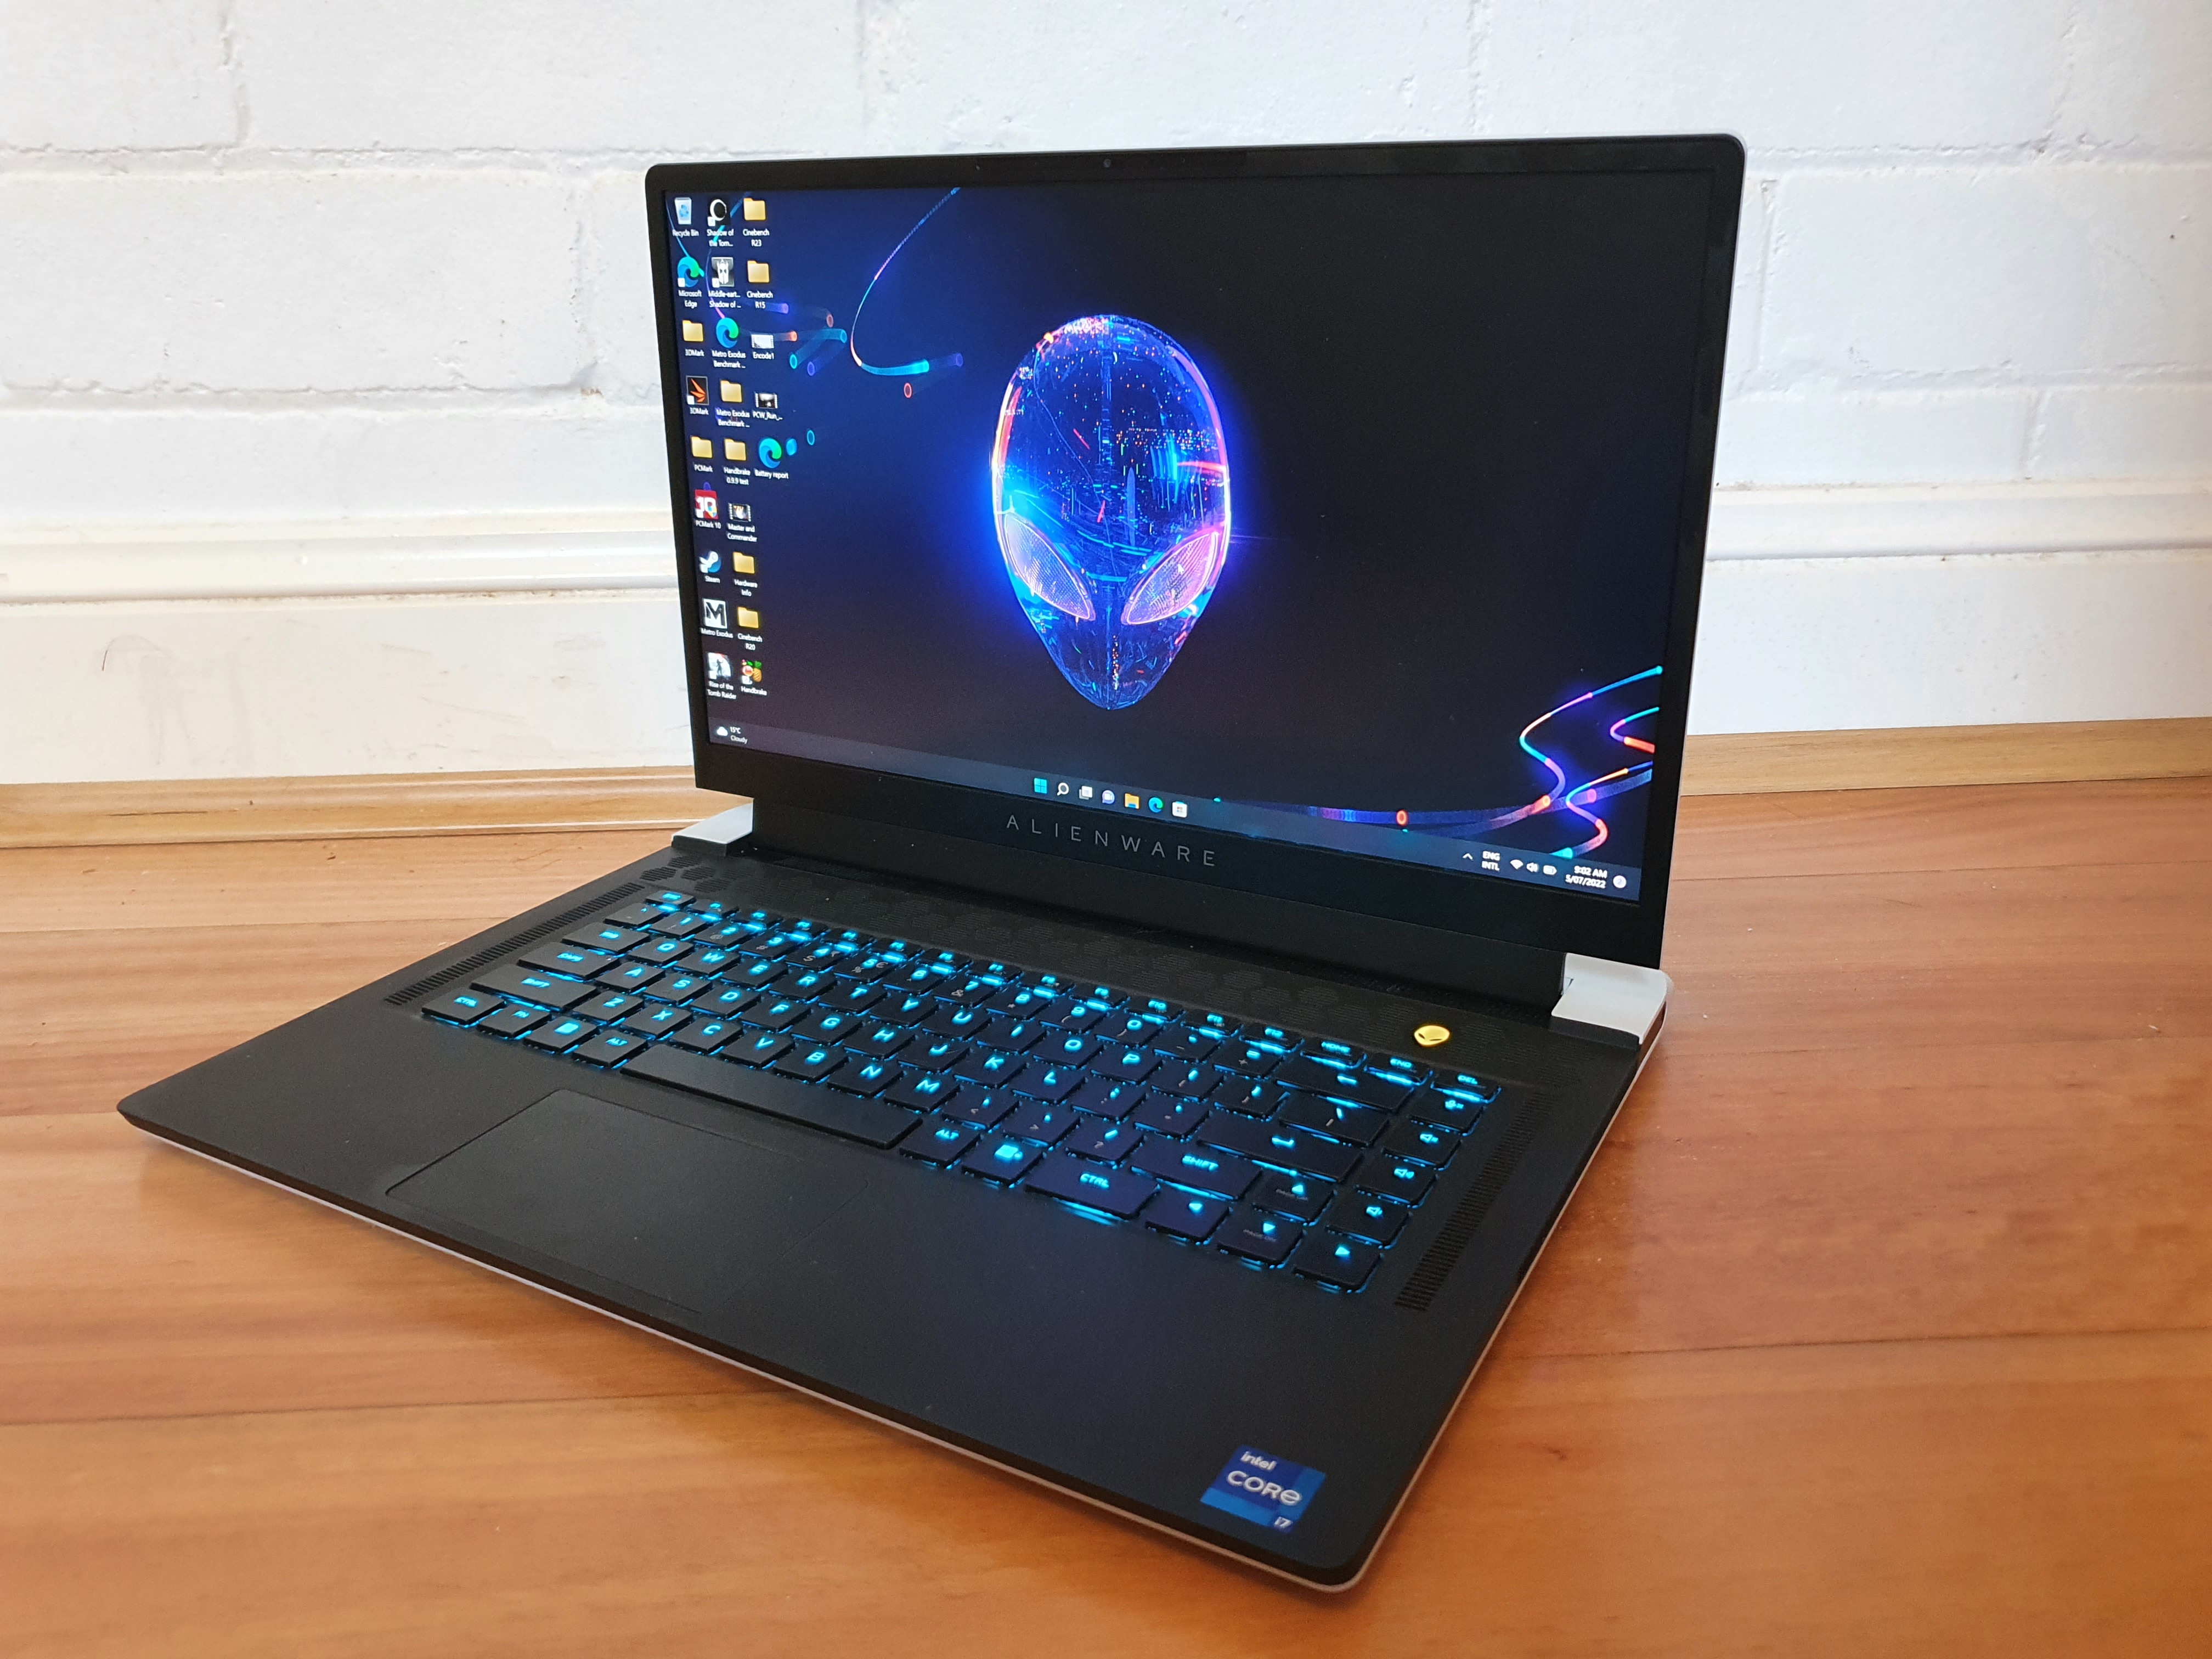 Alienware x15 R2 is the best high-end option